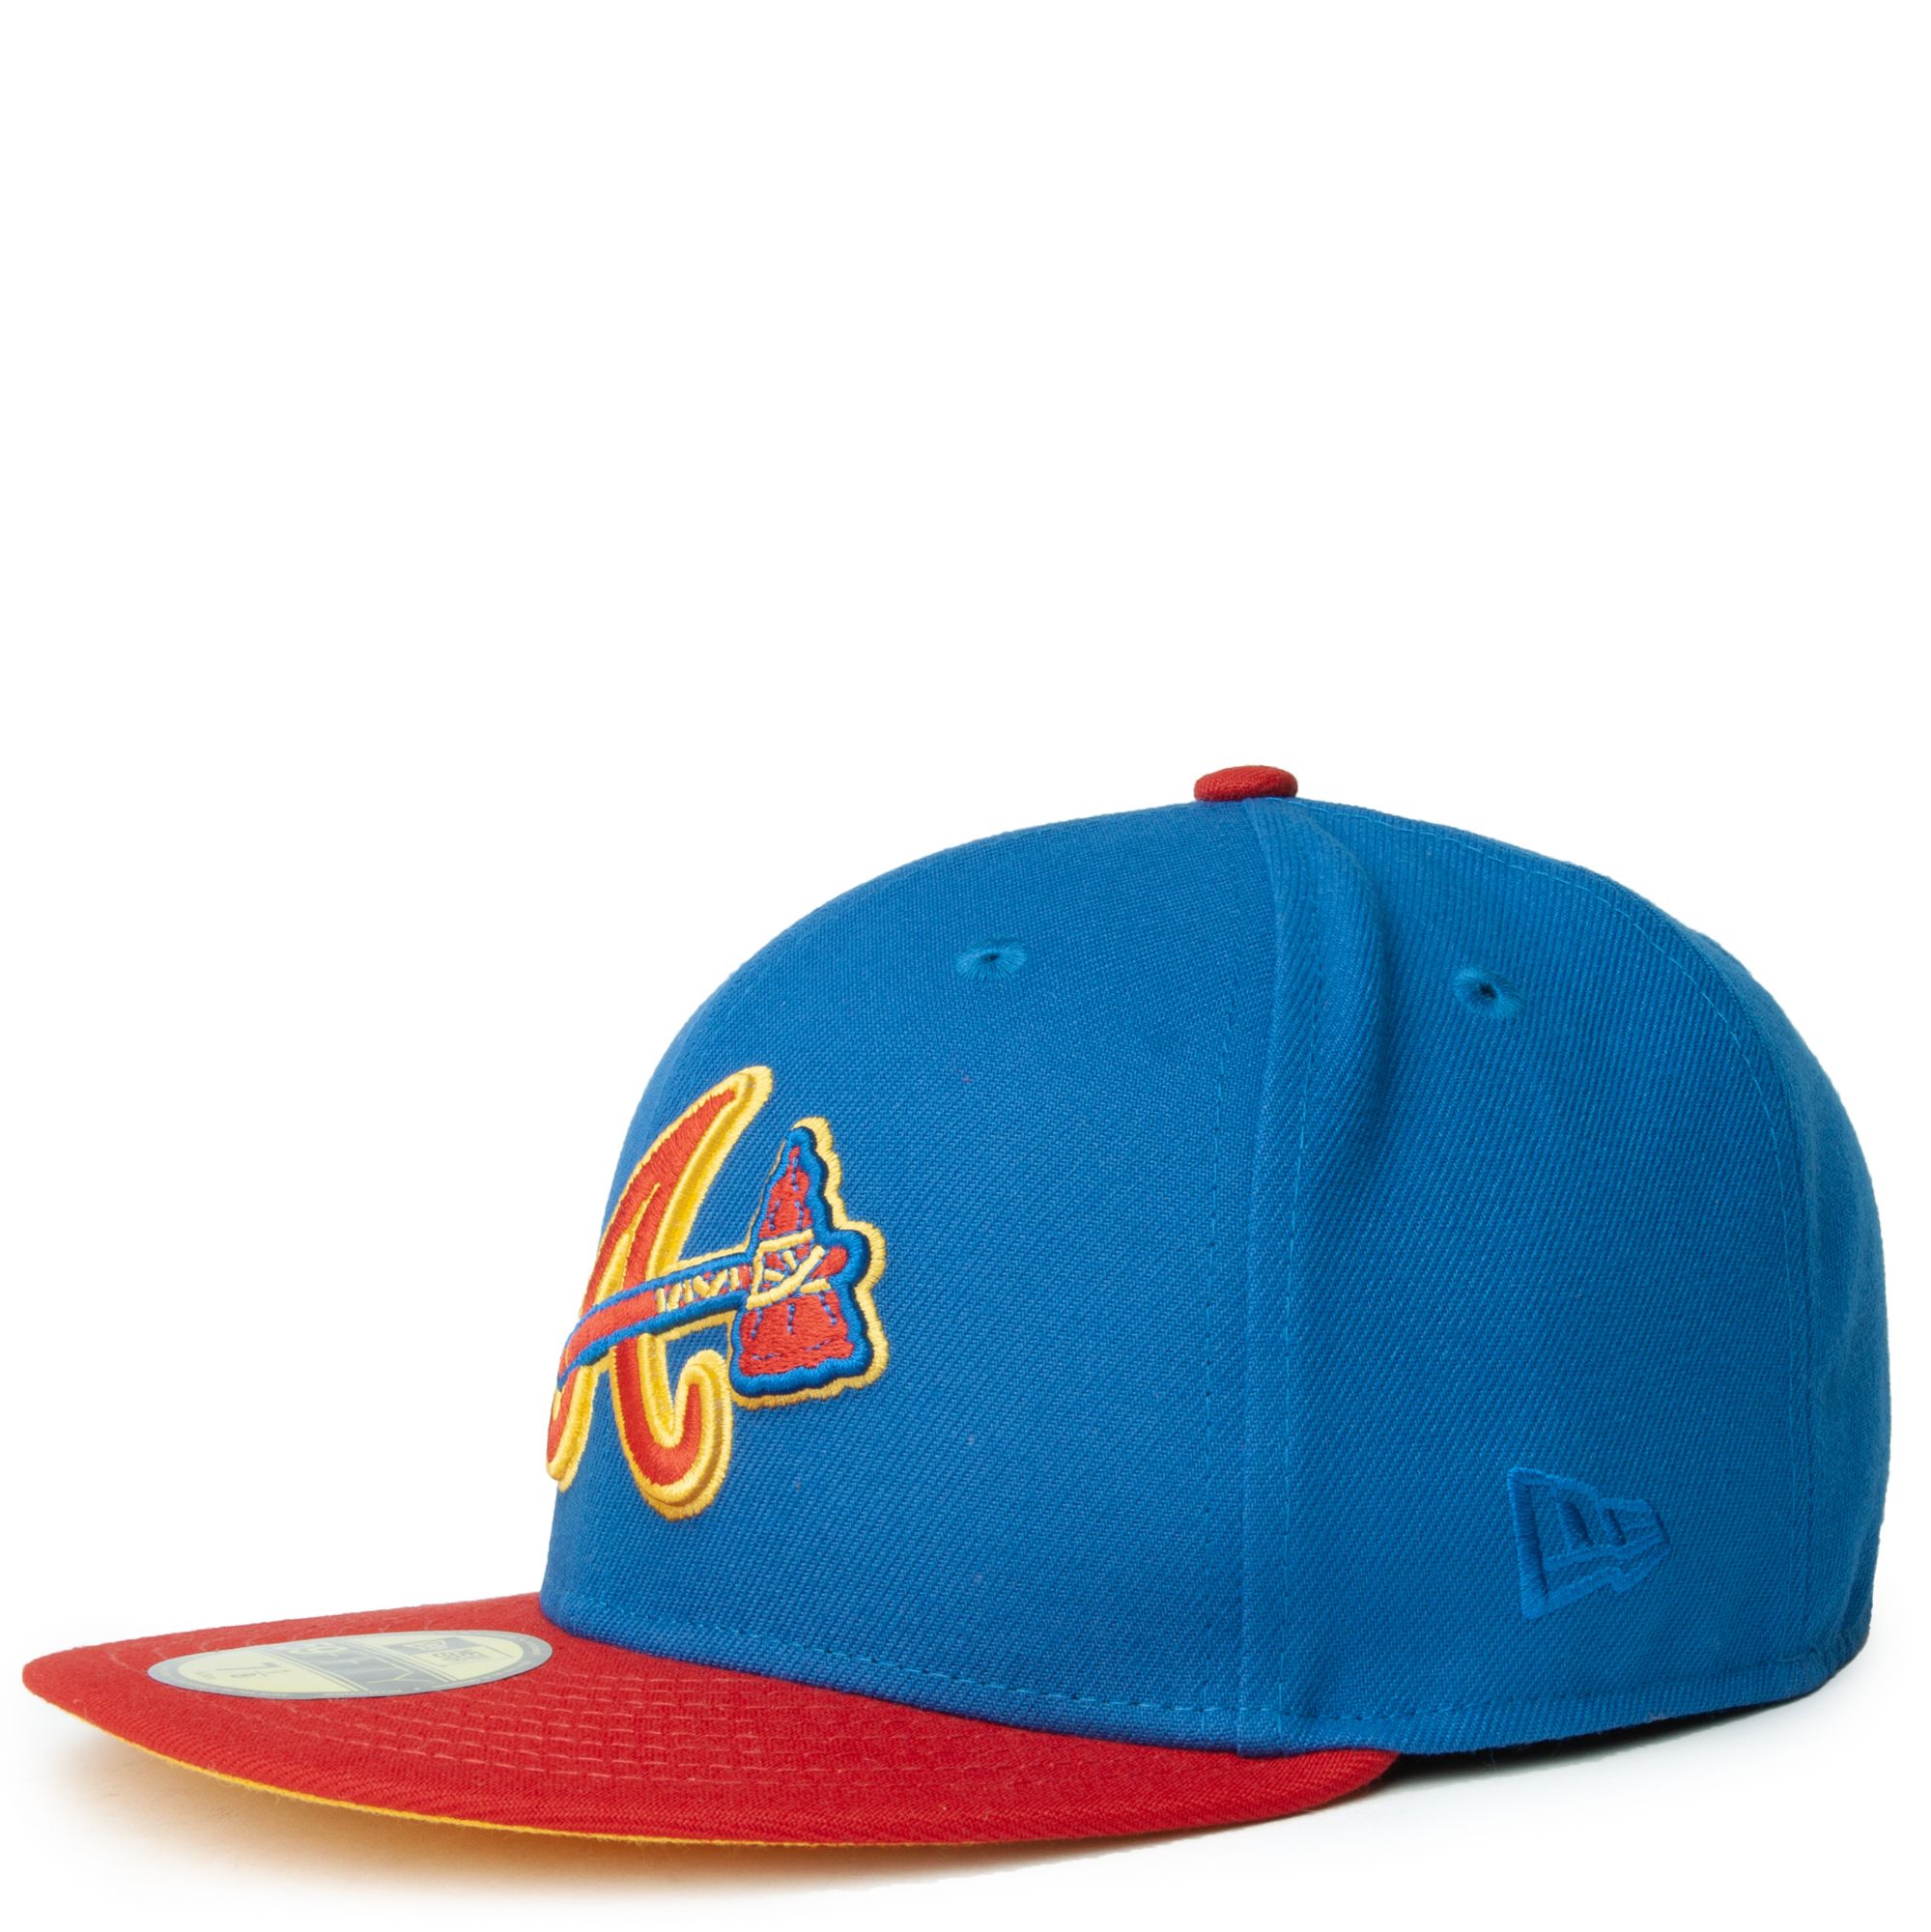 New Era Caps Atlanta Braves Blue Red 59FIFTY Fitted Hat Blue/Red